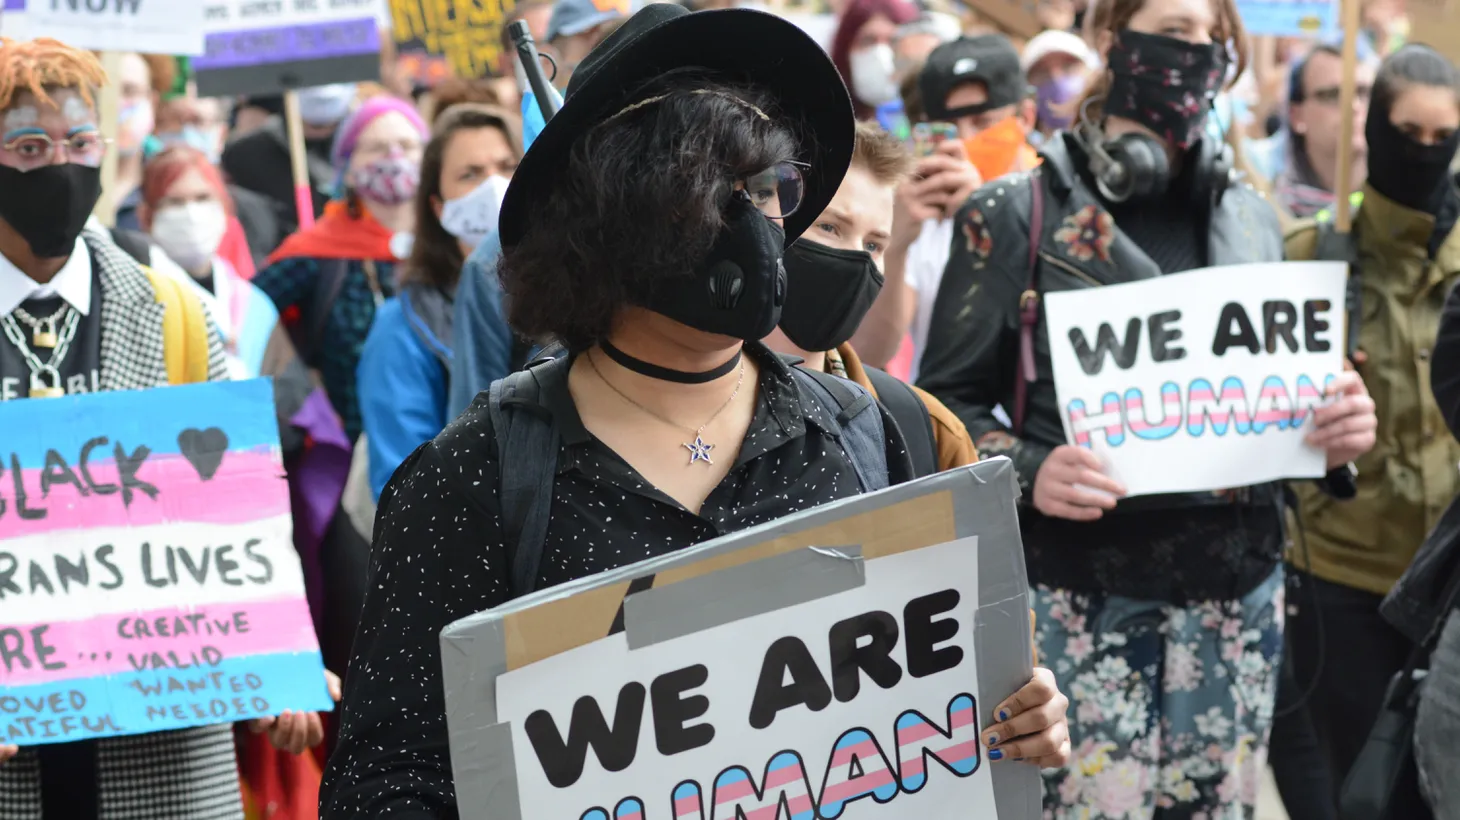 Activists at a transgender rally hold signs that say, “We are human.”